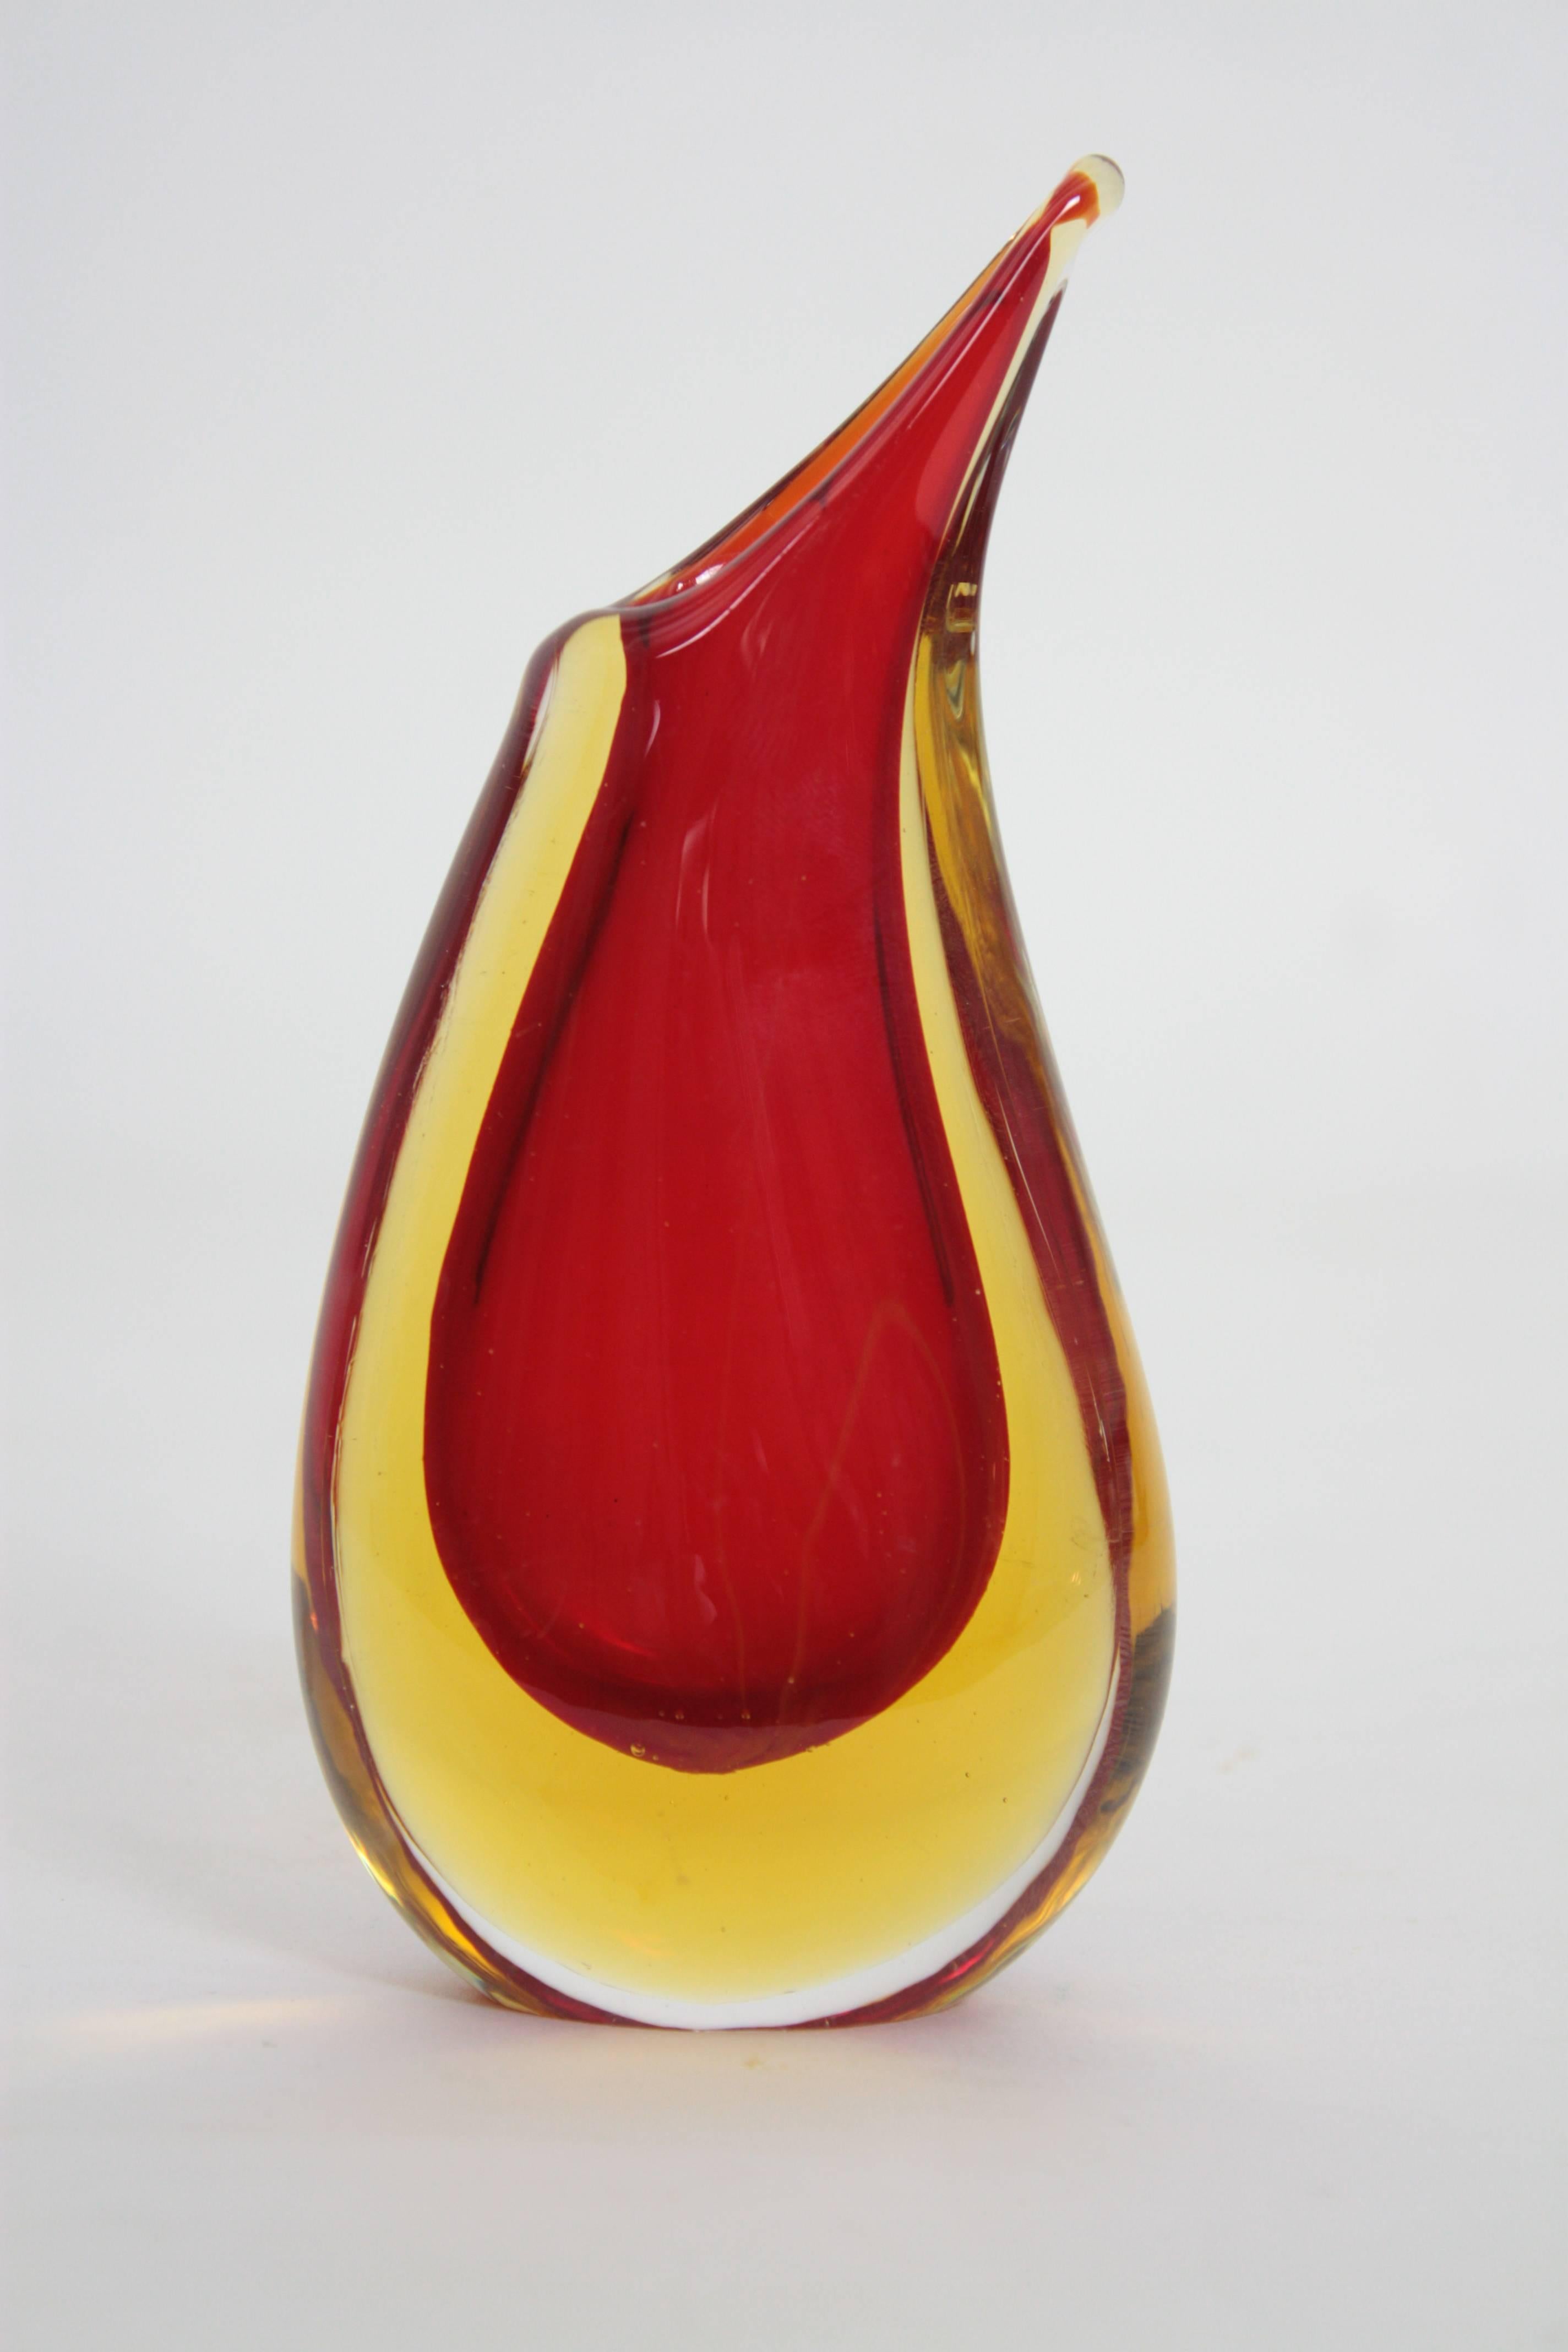 Whimsical red and yellow Sommerso glass vase. An art glass work attributed to Seguso Vetri D´Arte and Flavio Poli.
Amazing shape and vibrant colors.
Italy, 1950s.

This piece is excellent condition.

Avaliable a huge collection of Murano glass